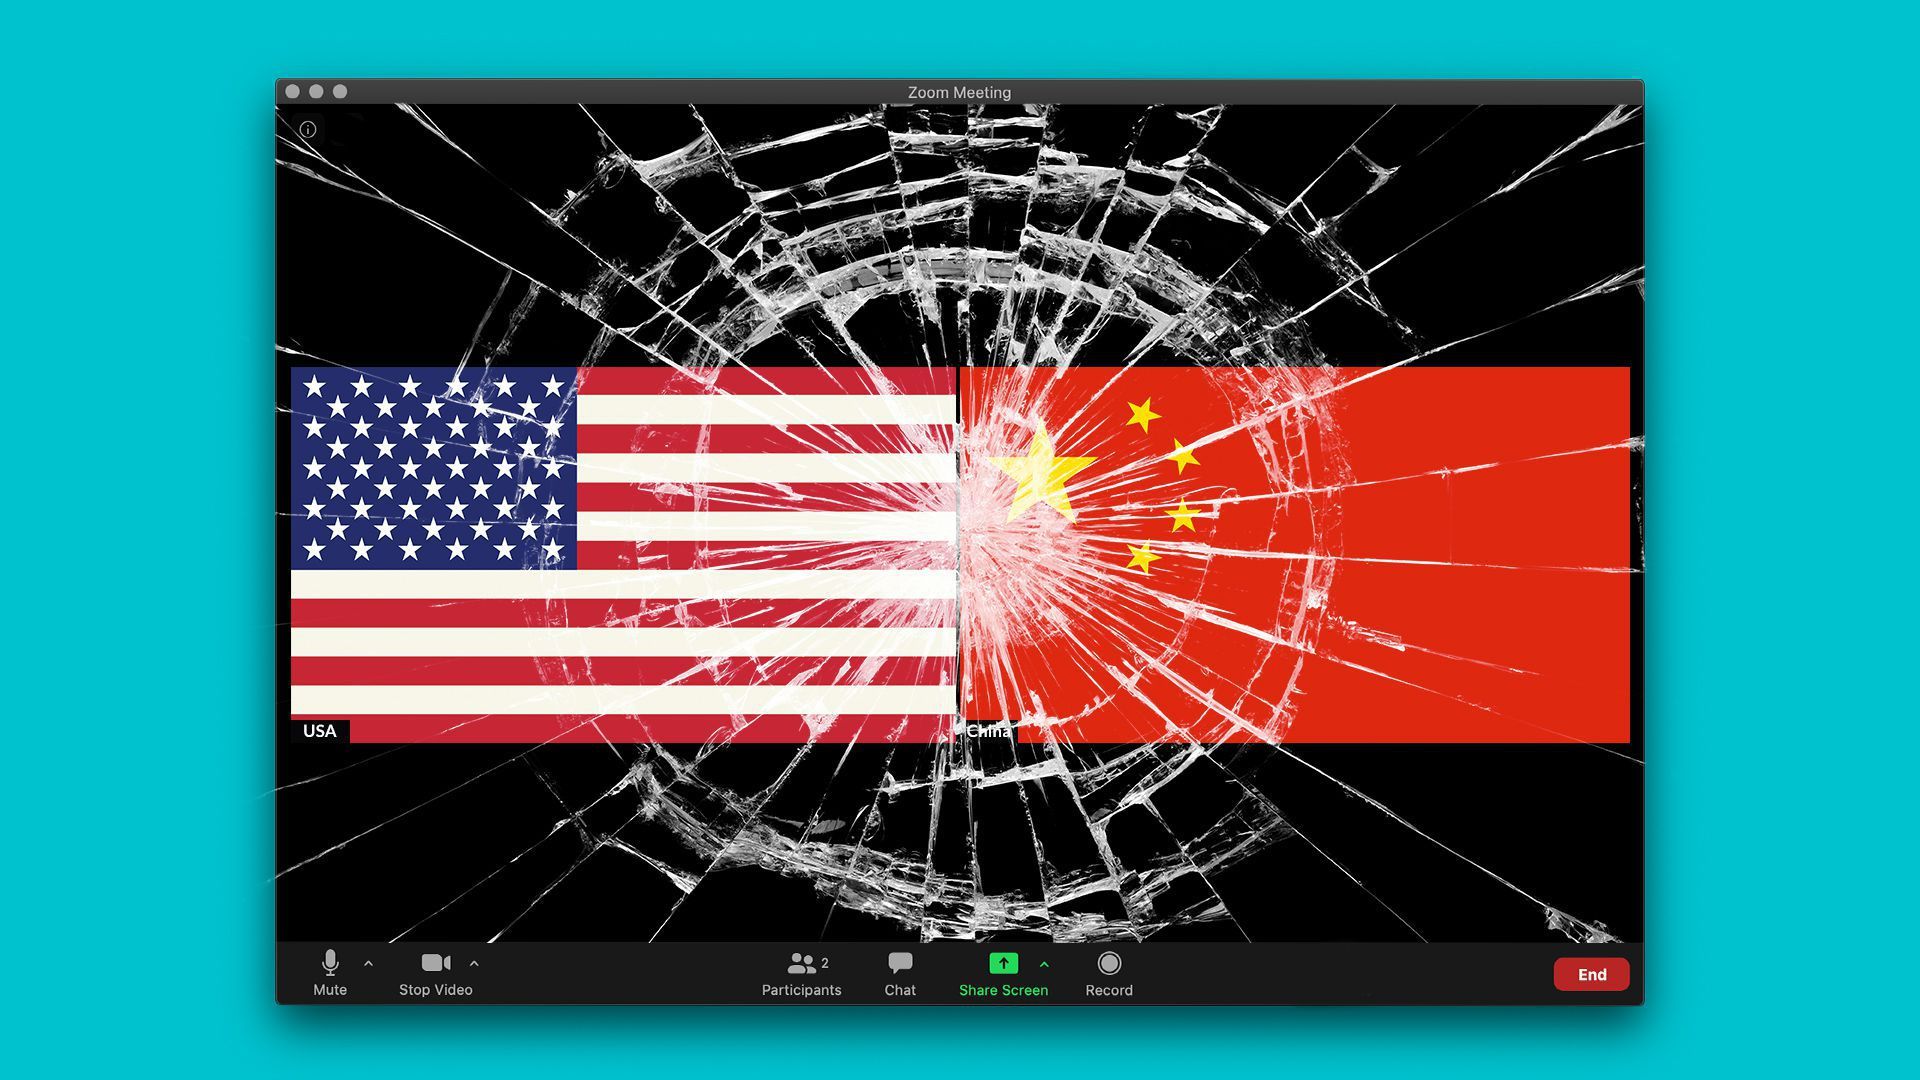 Illustration of the US flag and Chinese flag on a Zoom call, but the computer screen is cracked